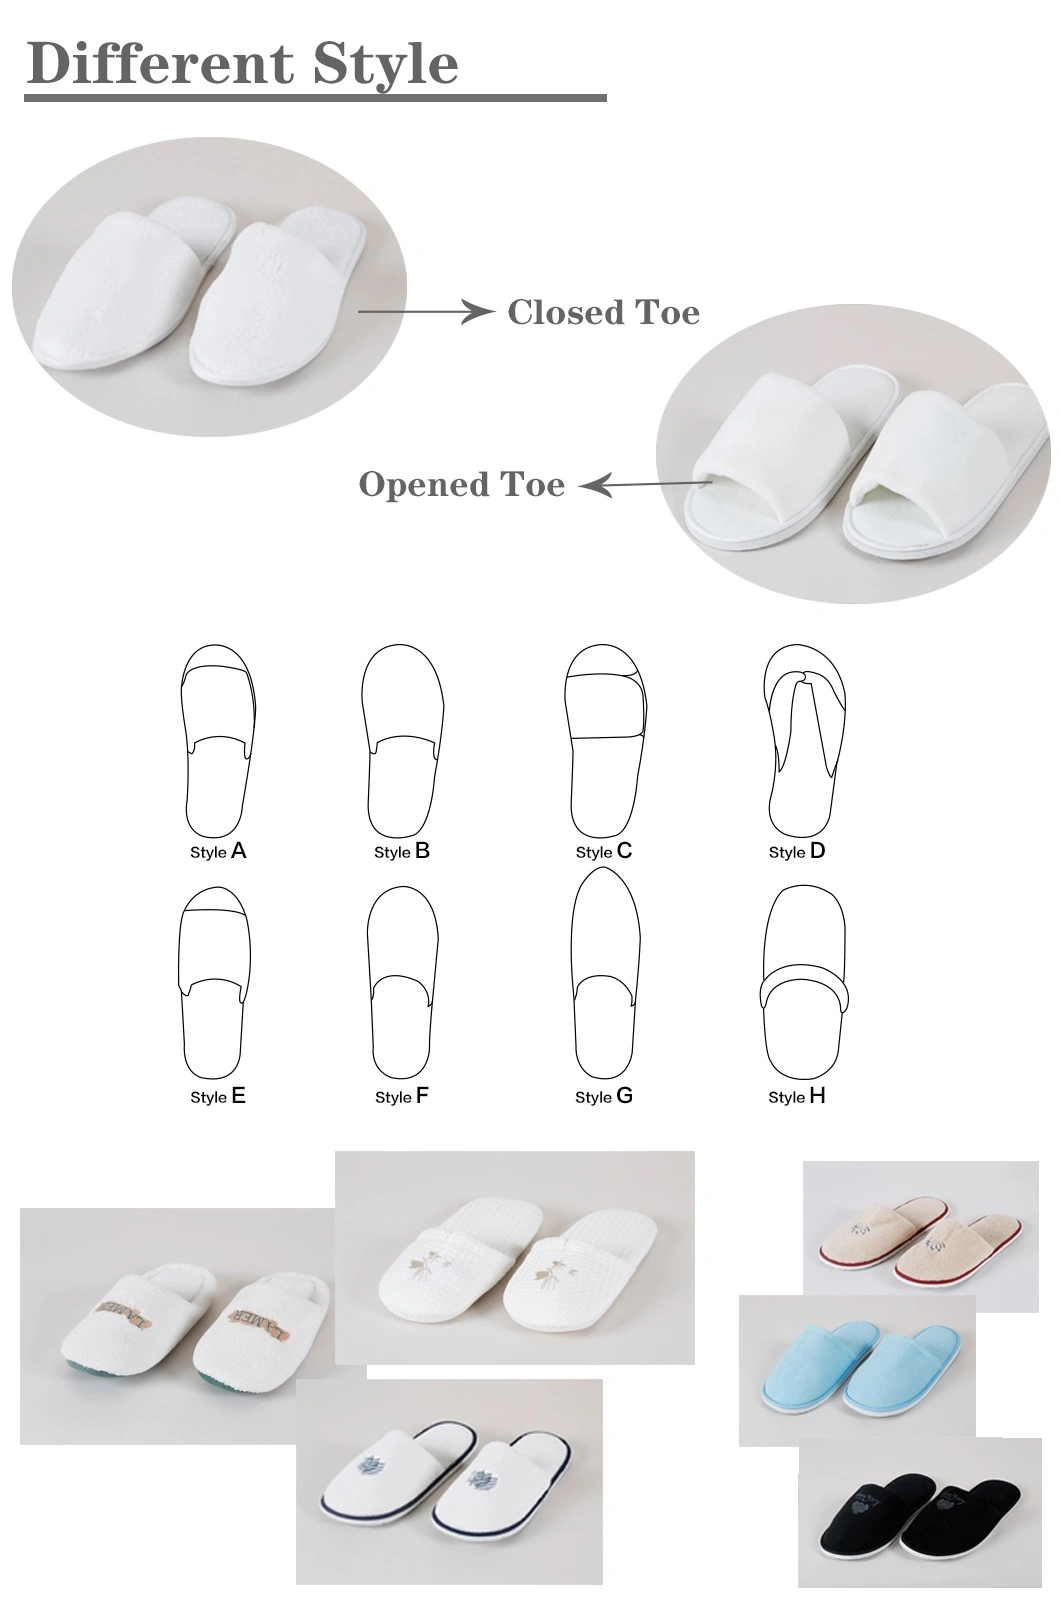 Indoor Sleeper Shoes Disposable Washable Anti Slip Slippers Cheap Hotel Open Toe Luxury Slipper